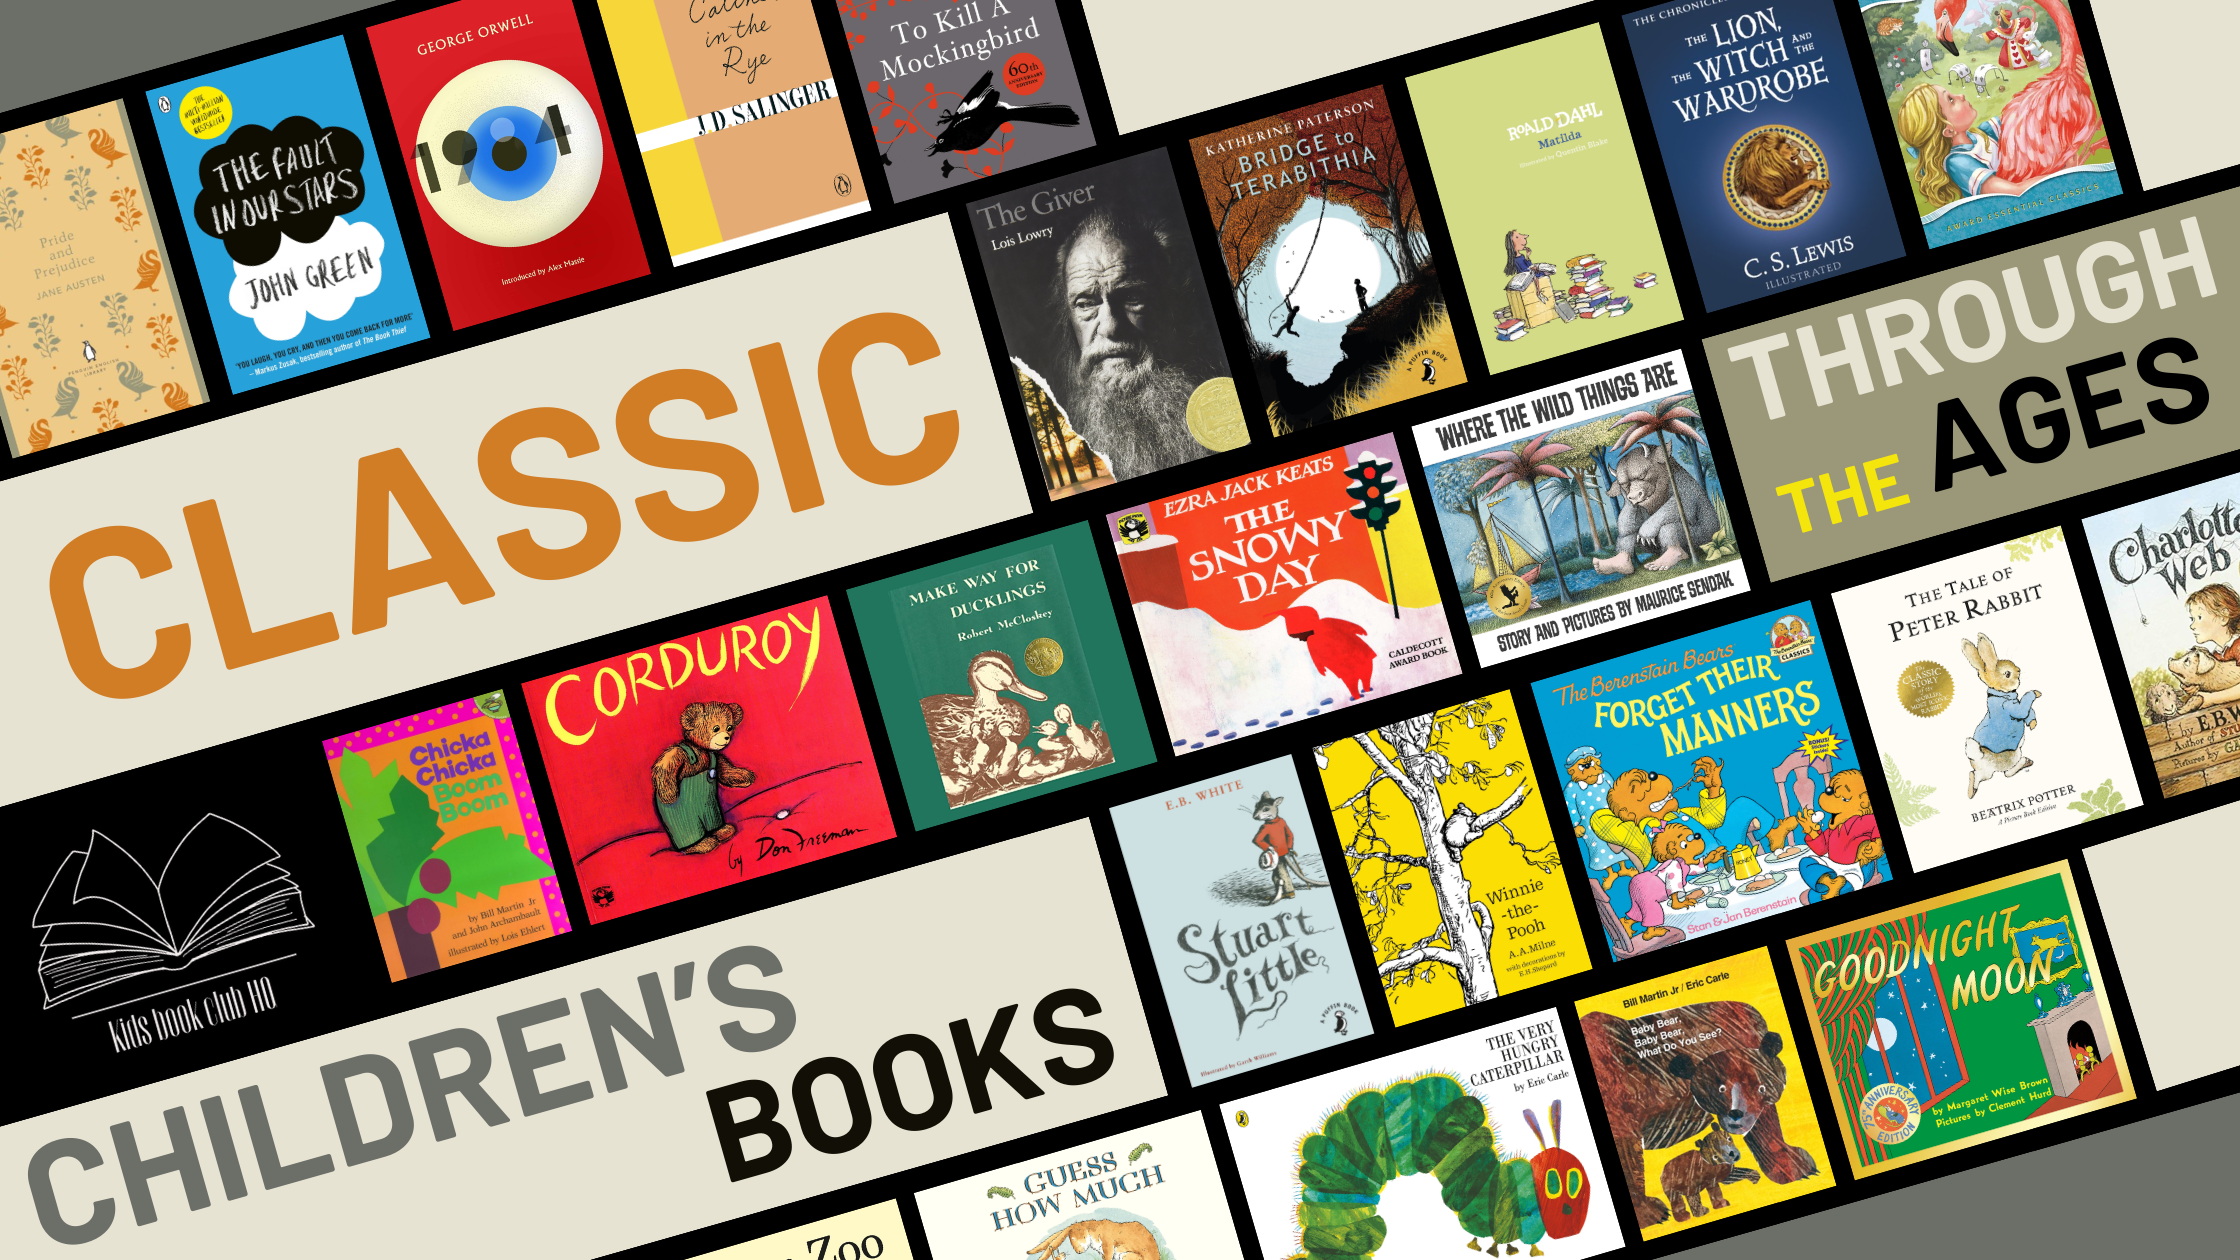 Classic Children’s Books: Ultimate guide through the Ages